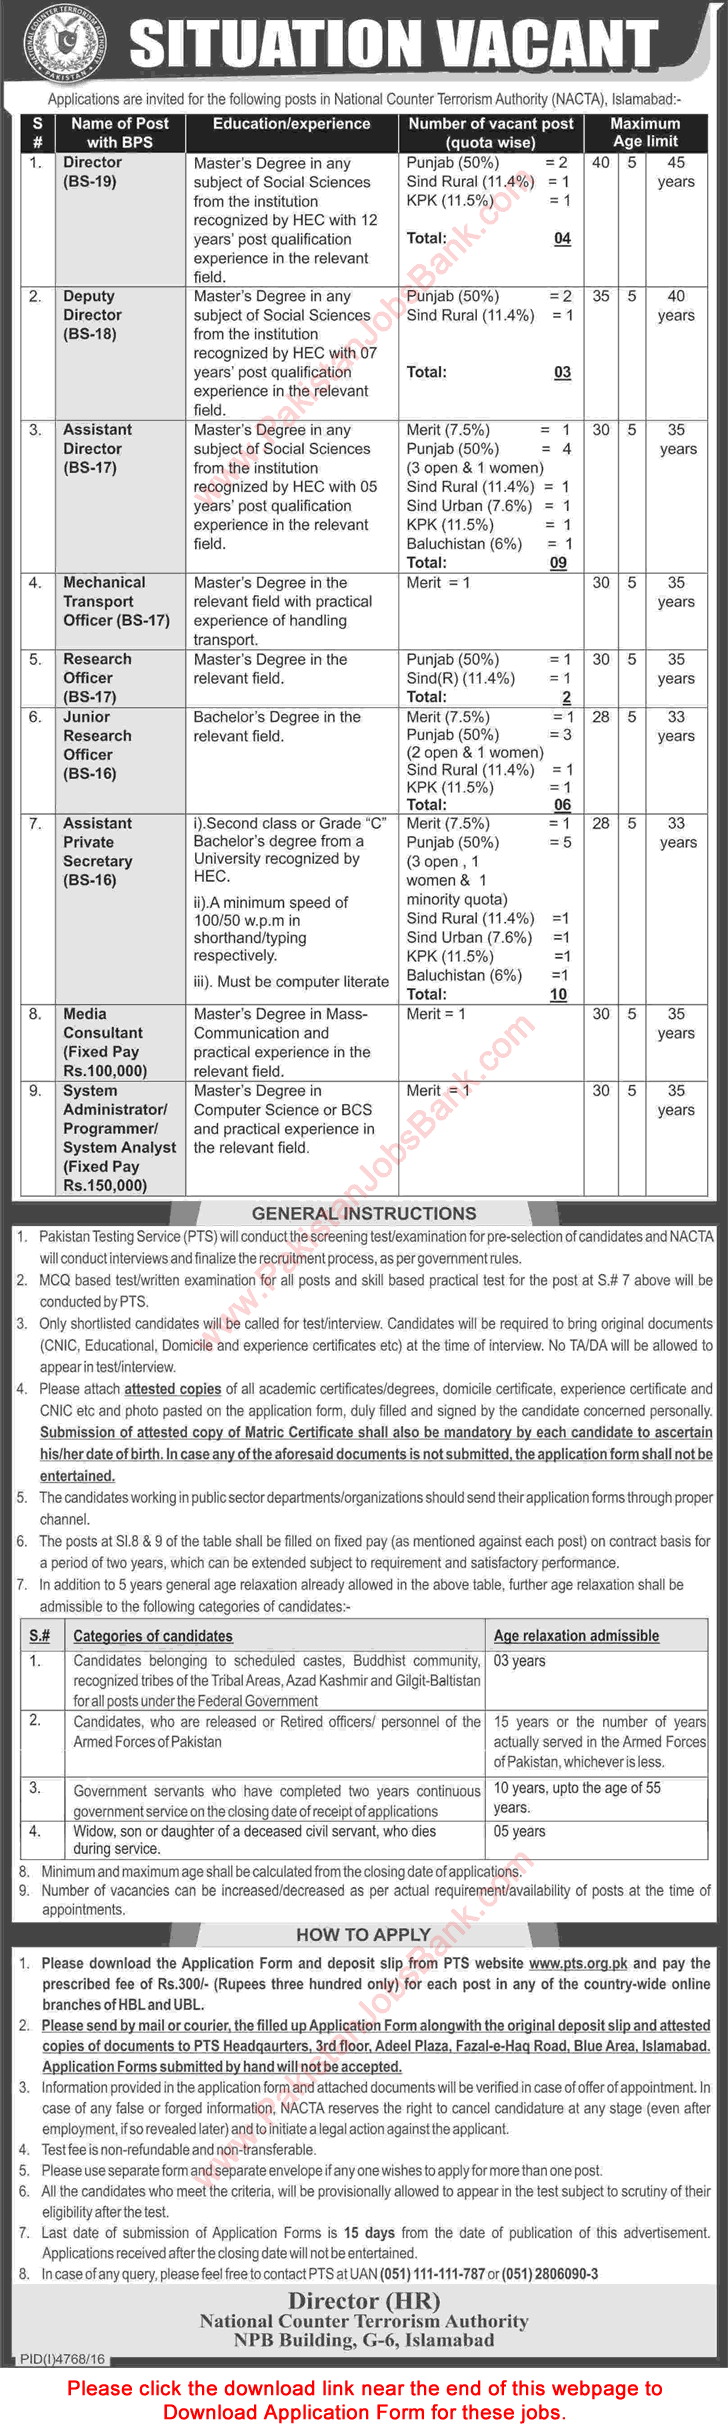 NACTA Jobs March 2017 Islamabad PTS Application Form Assistant Directors, Private Secretaries & Others Latest